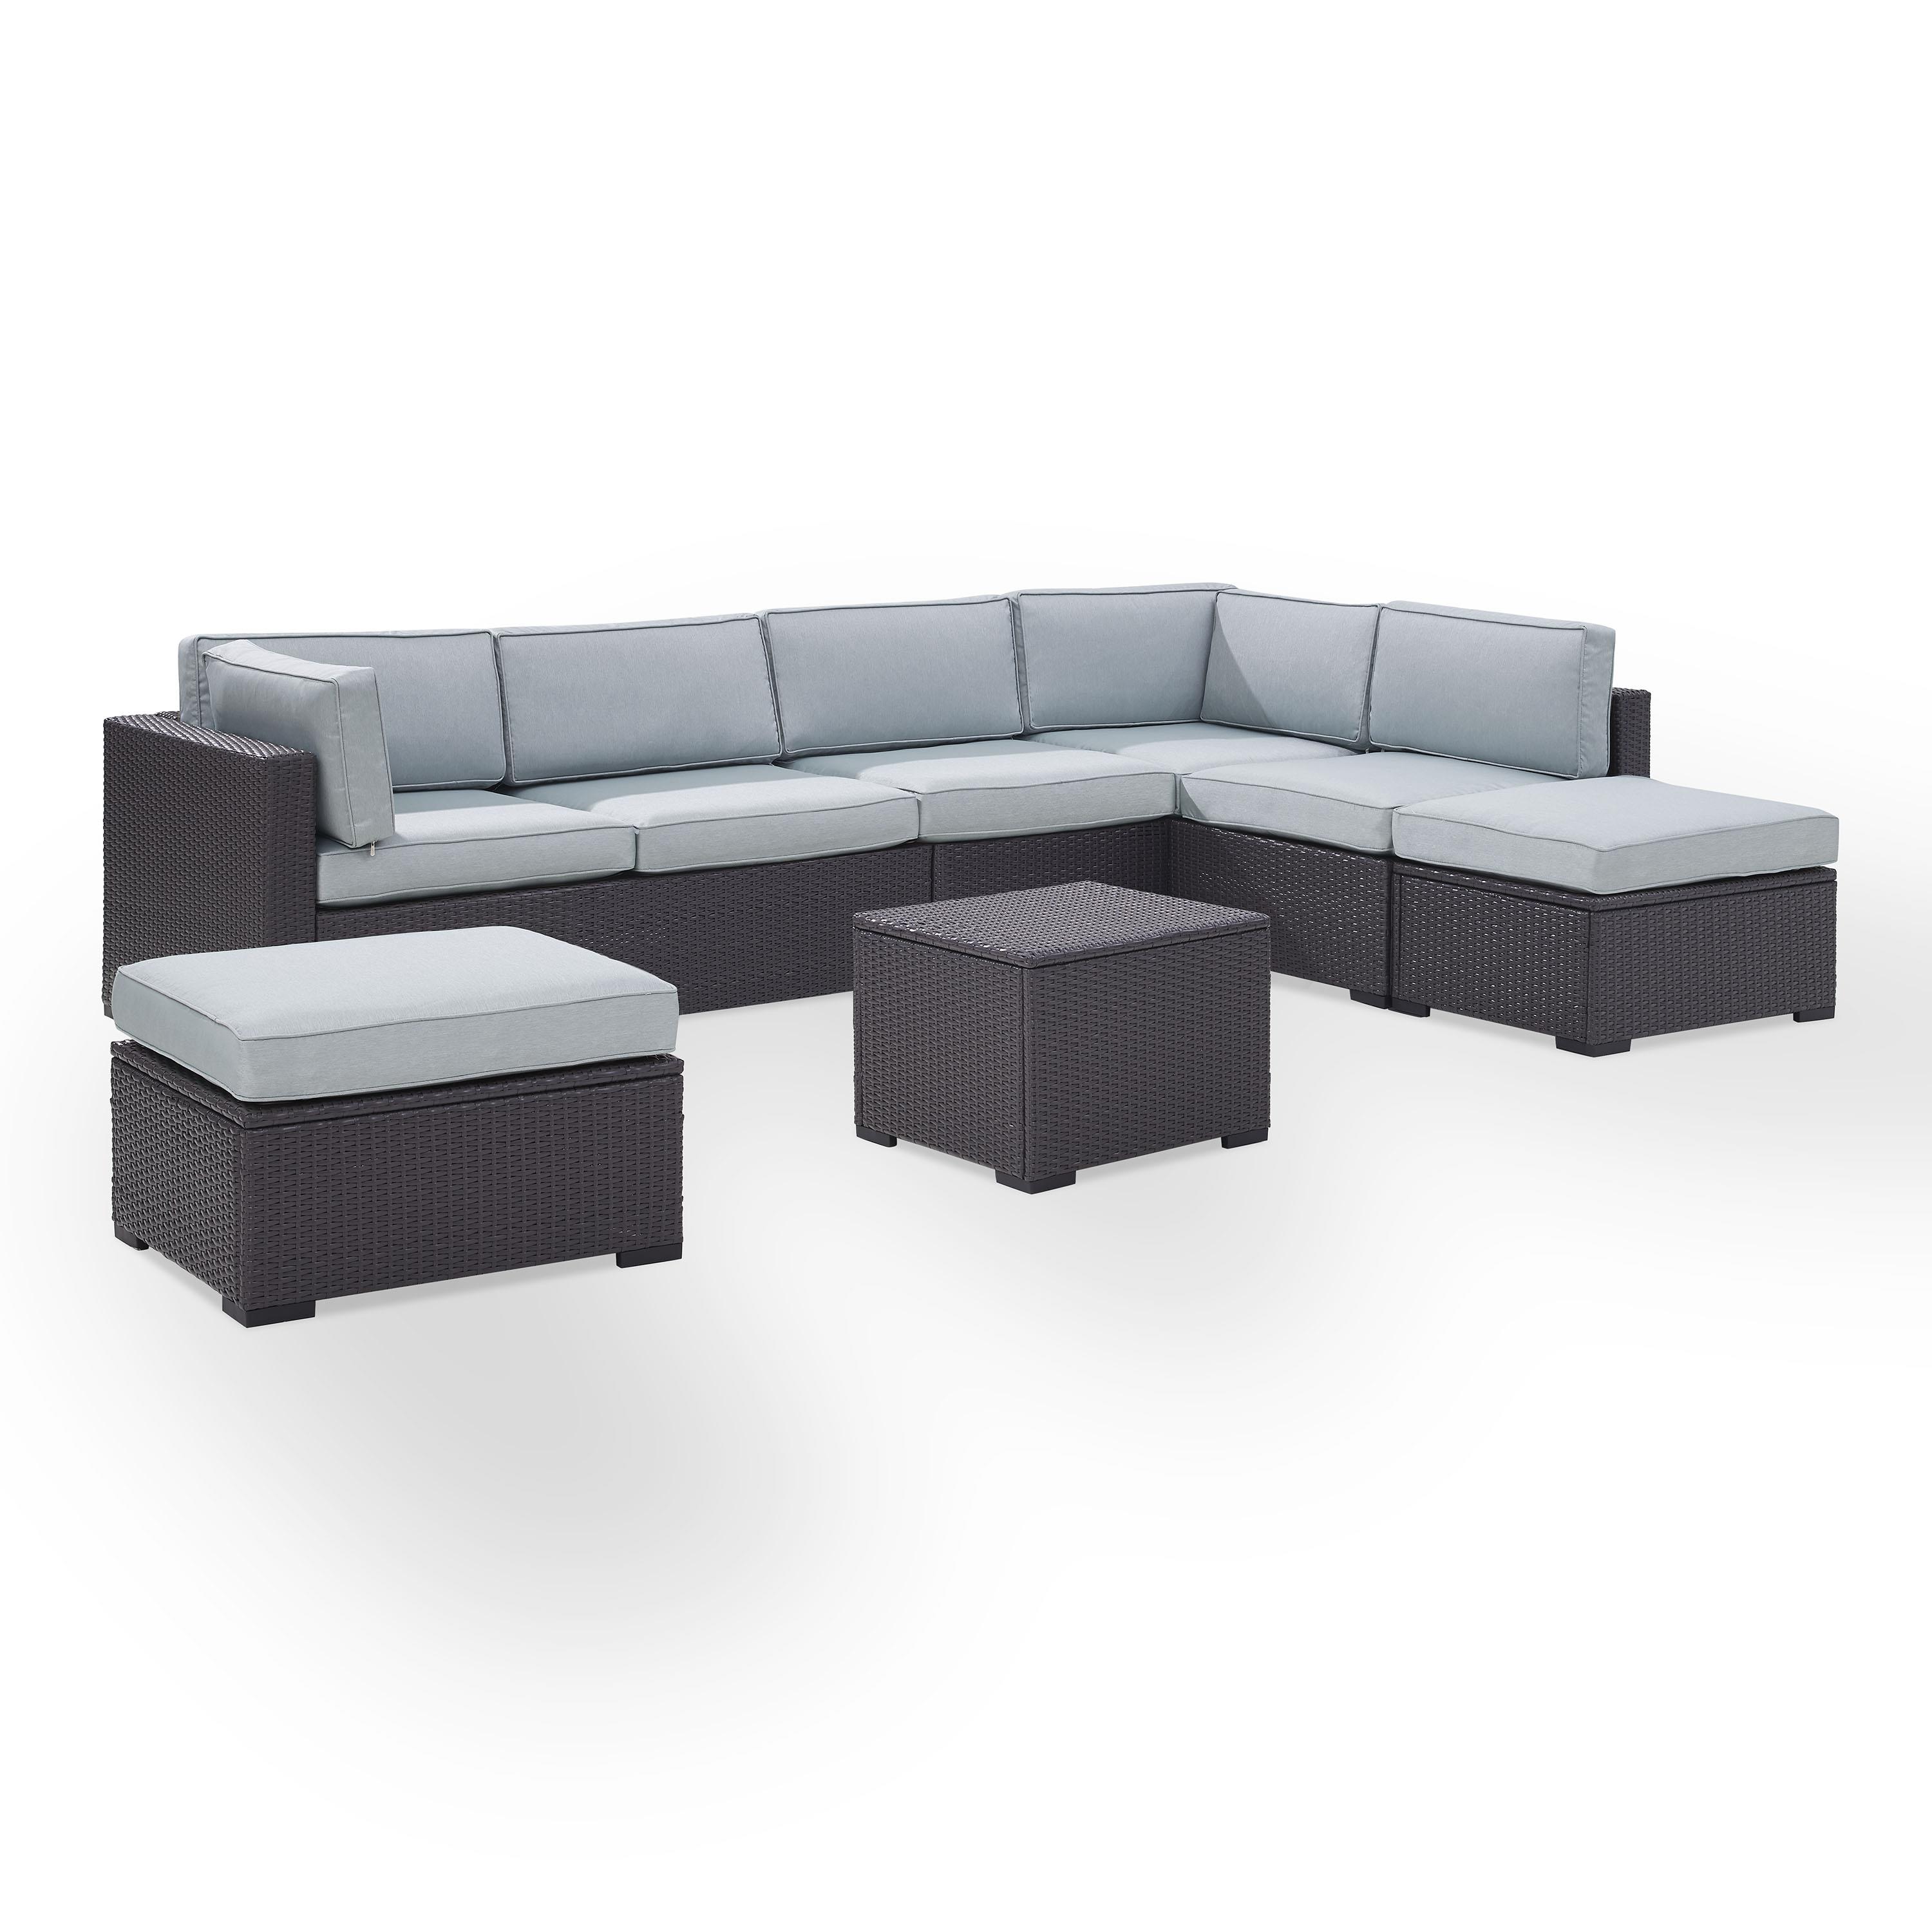 Crosley Furniture Biscayne 6 Piece Metal Patio Sectional Set in Brown & Blue - image 3 of 4